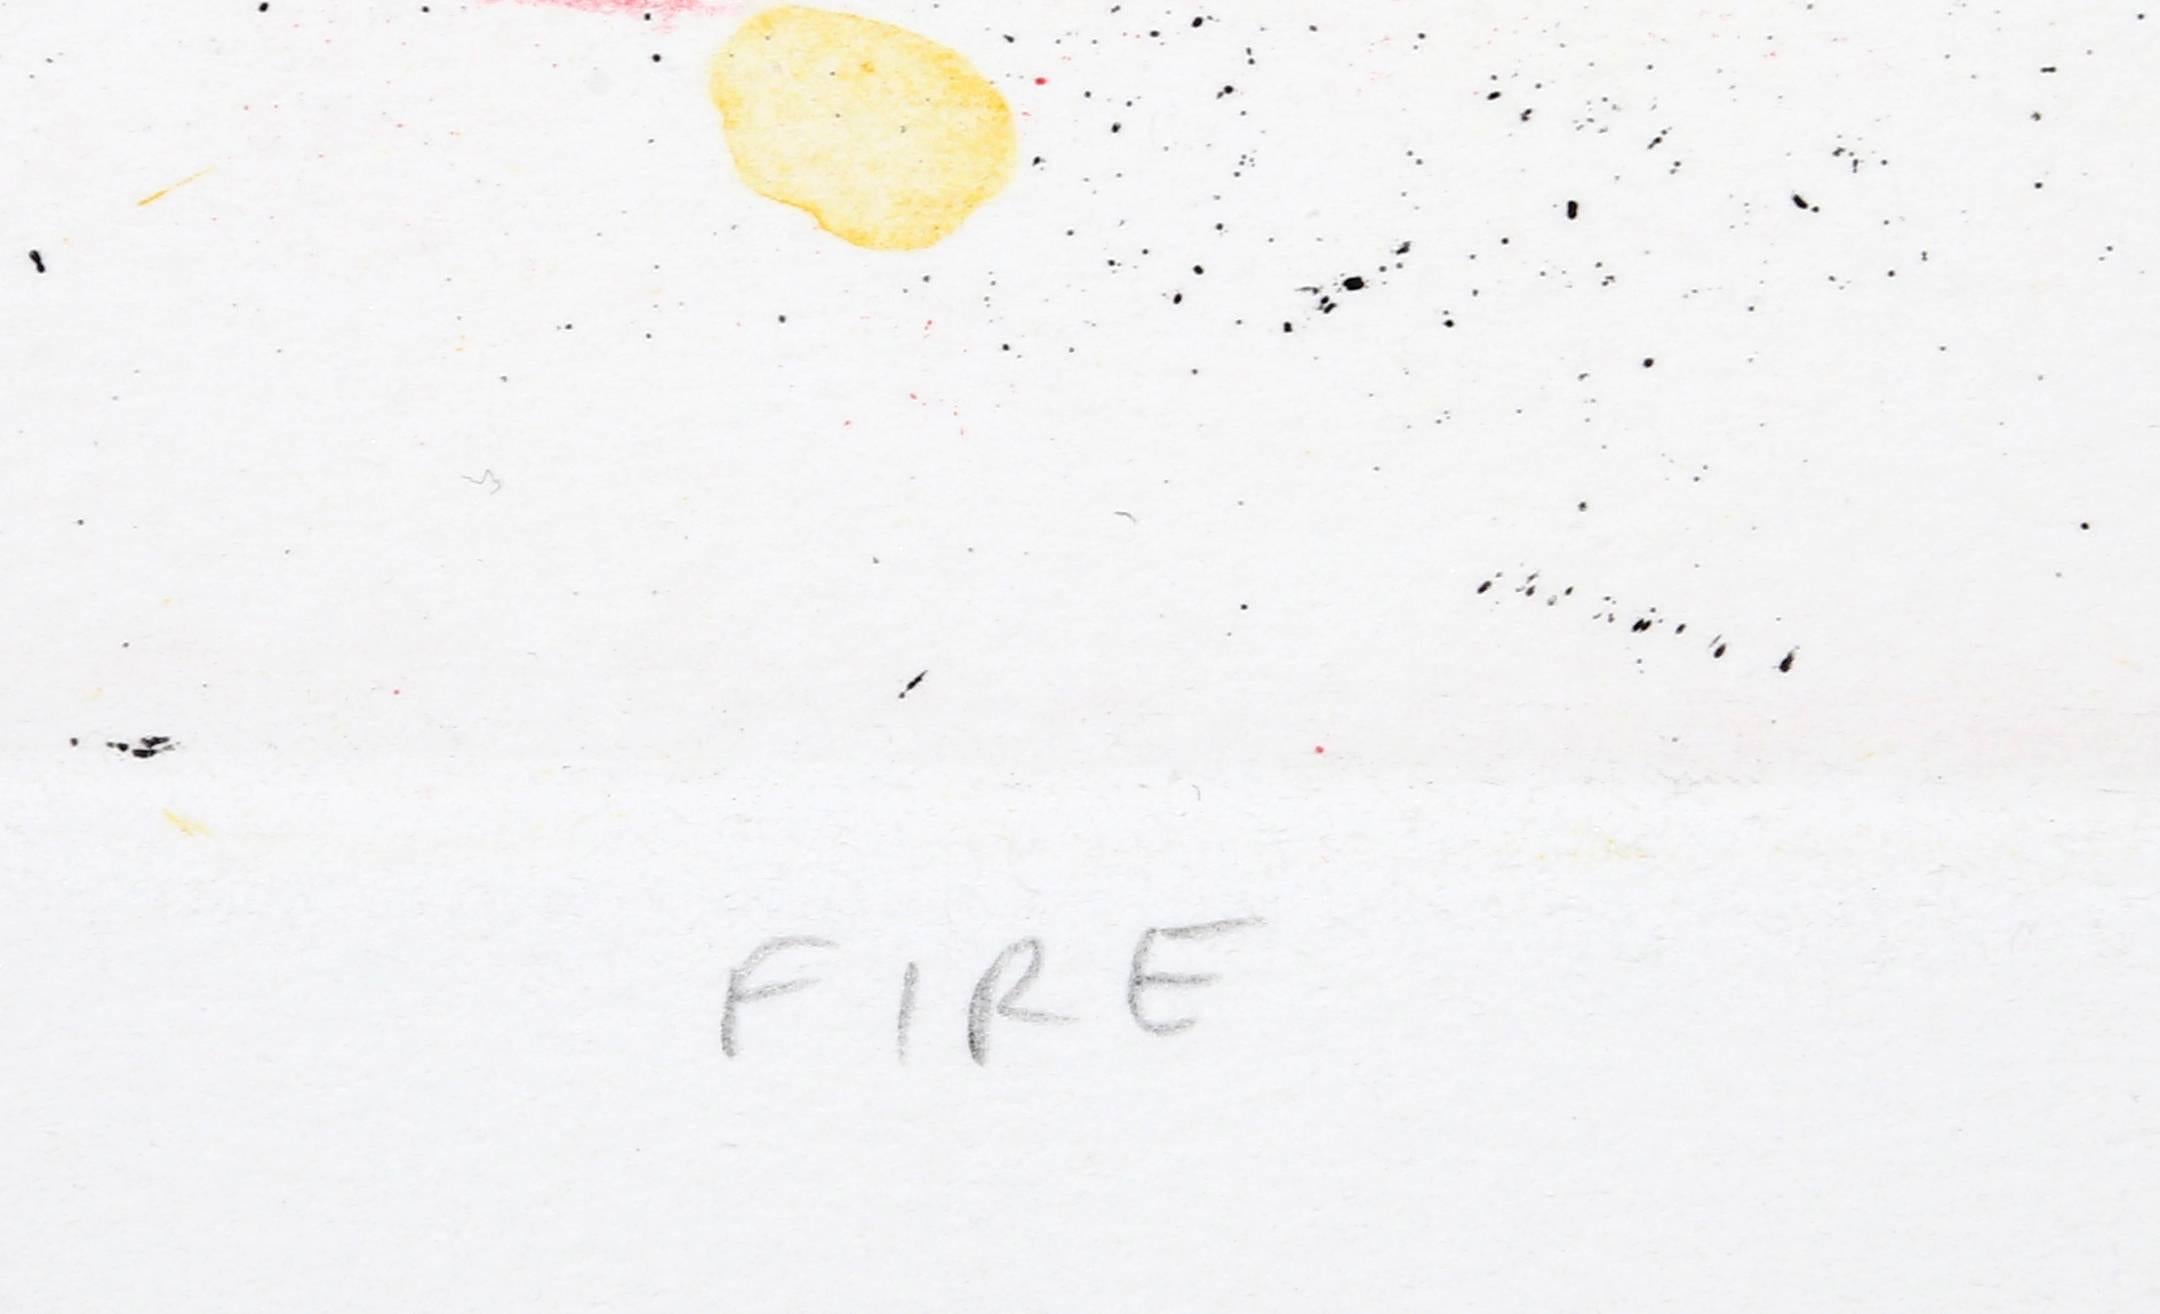 Fire - Print by Louisa Chase